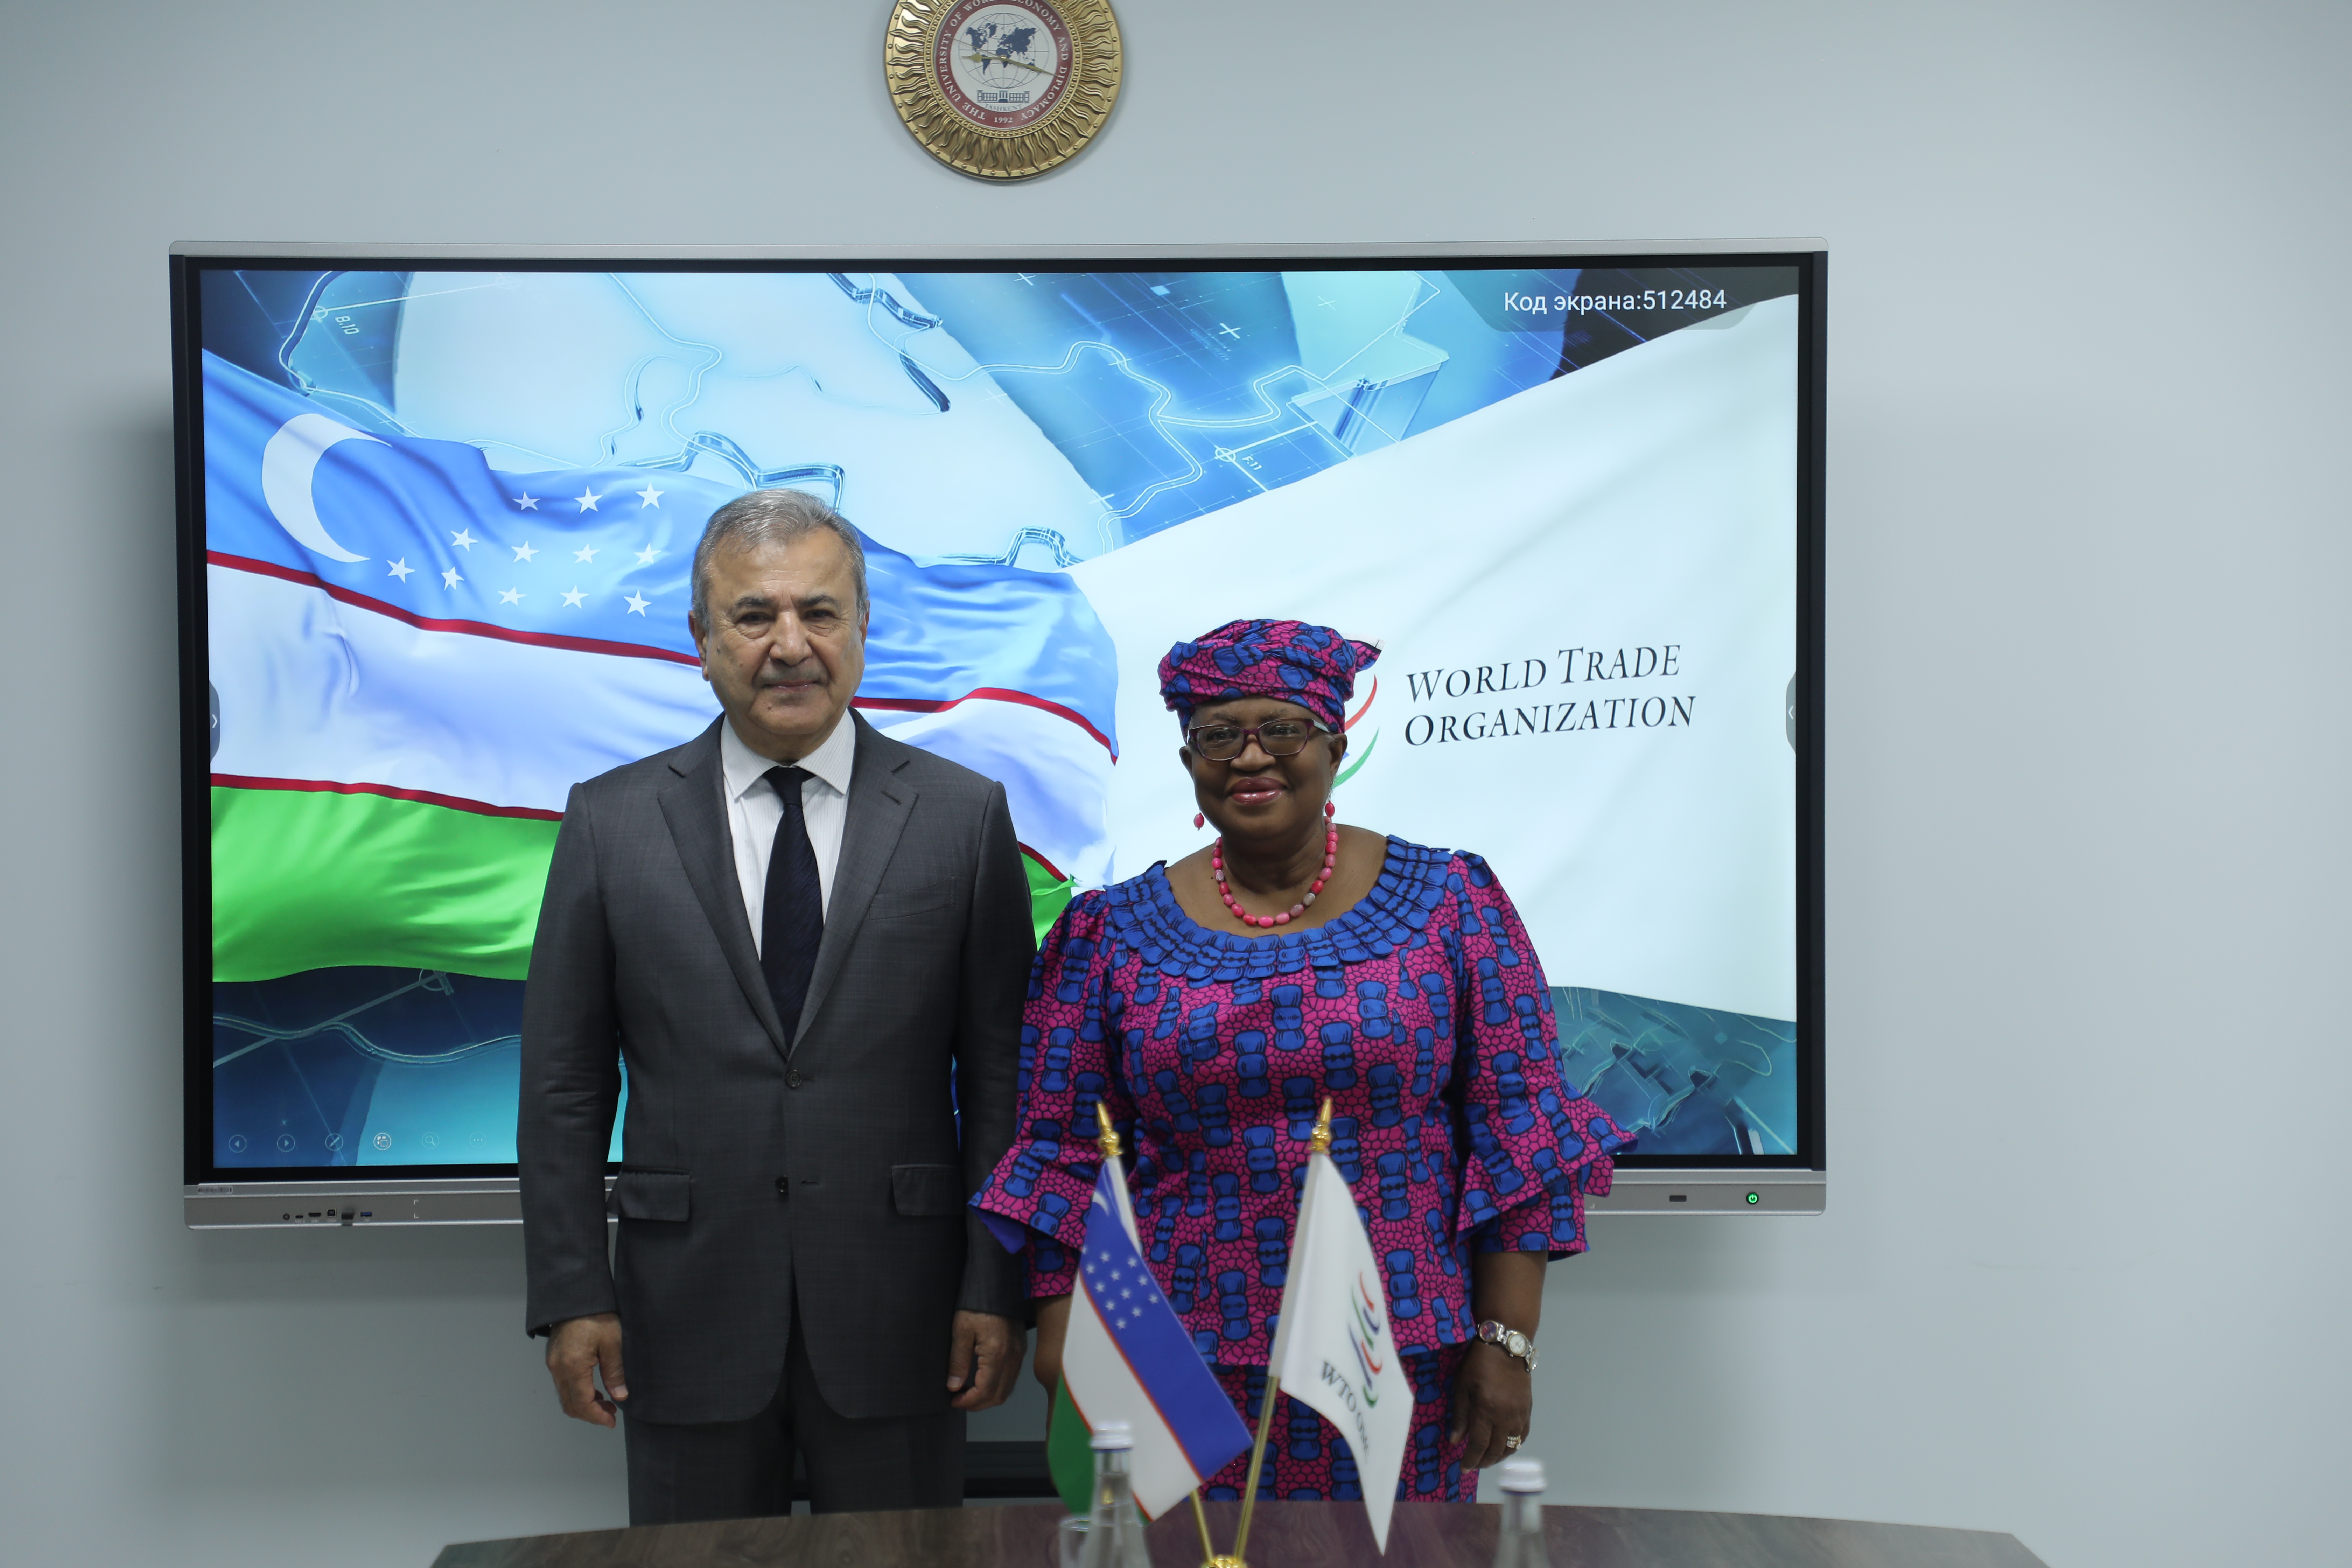 Director-General of the World Trade Organization visited UWED